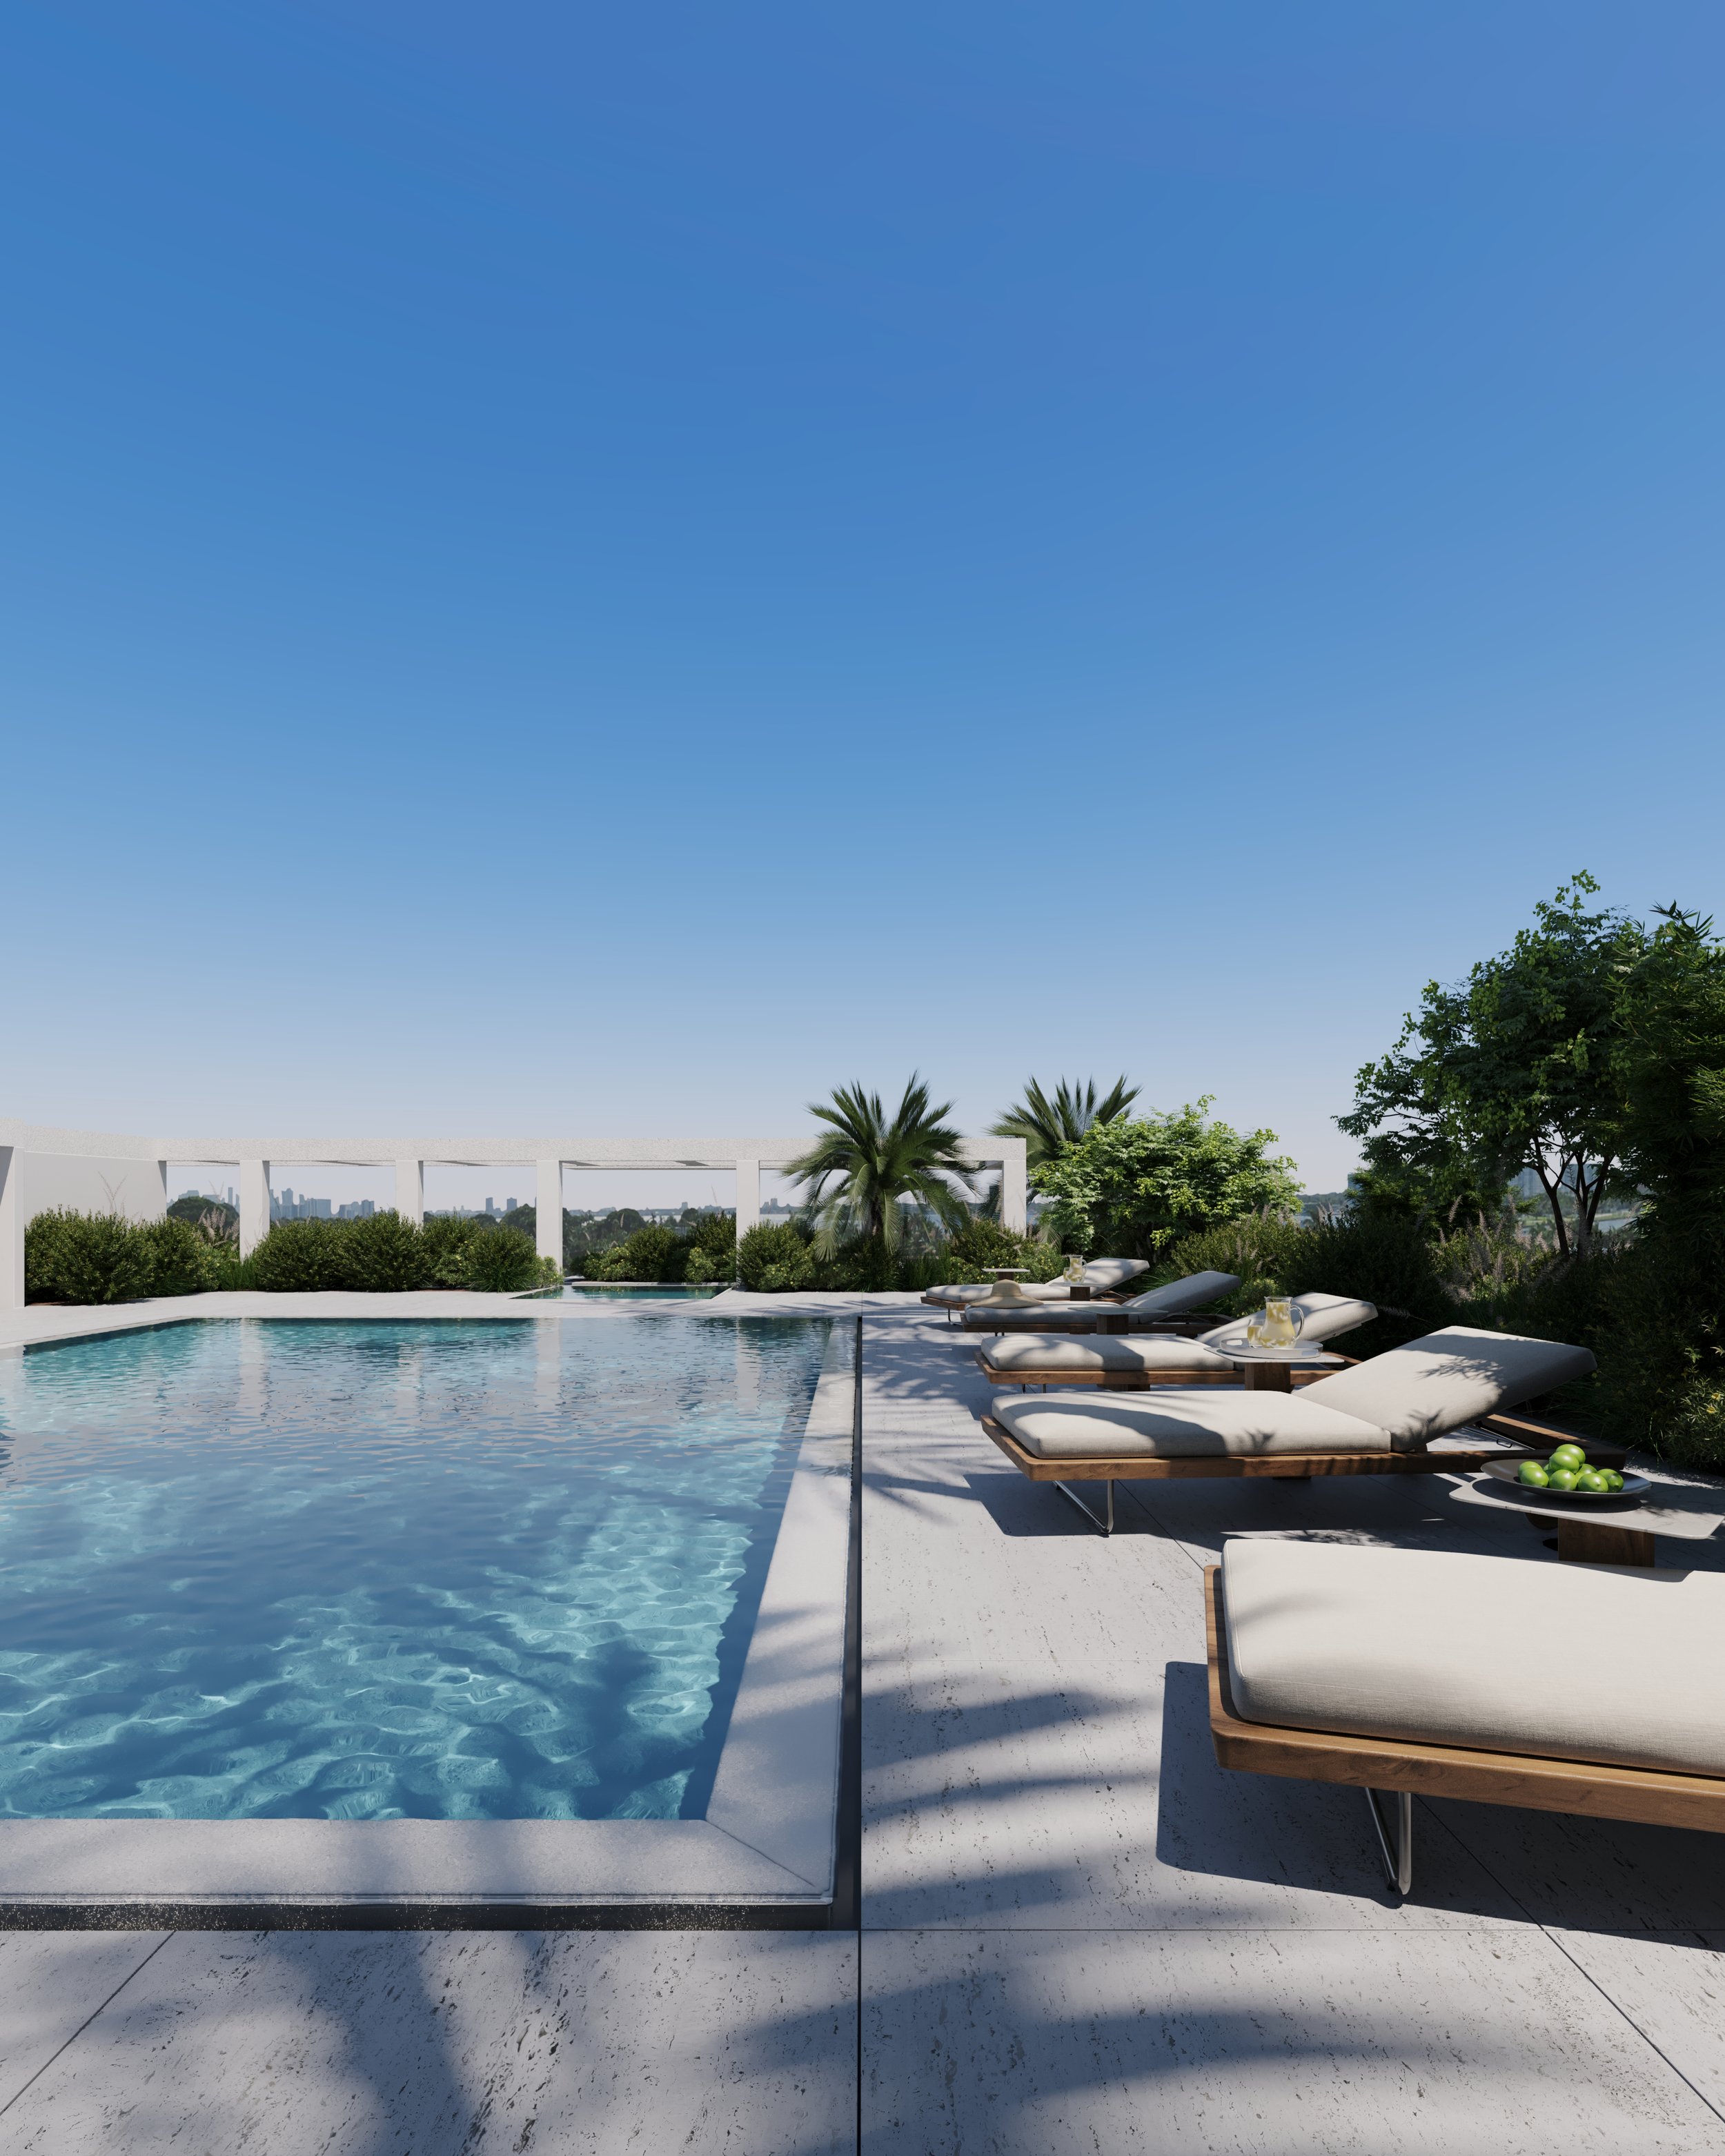 New York-Based Developer The Horizon Group Launches Sales For 9900 West Condominium On The Bay Harbor Islands 10.jpg